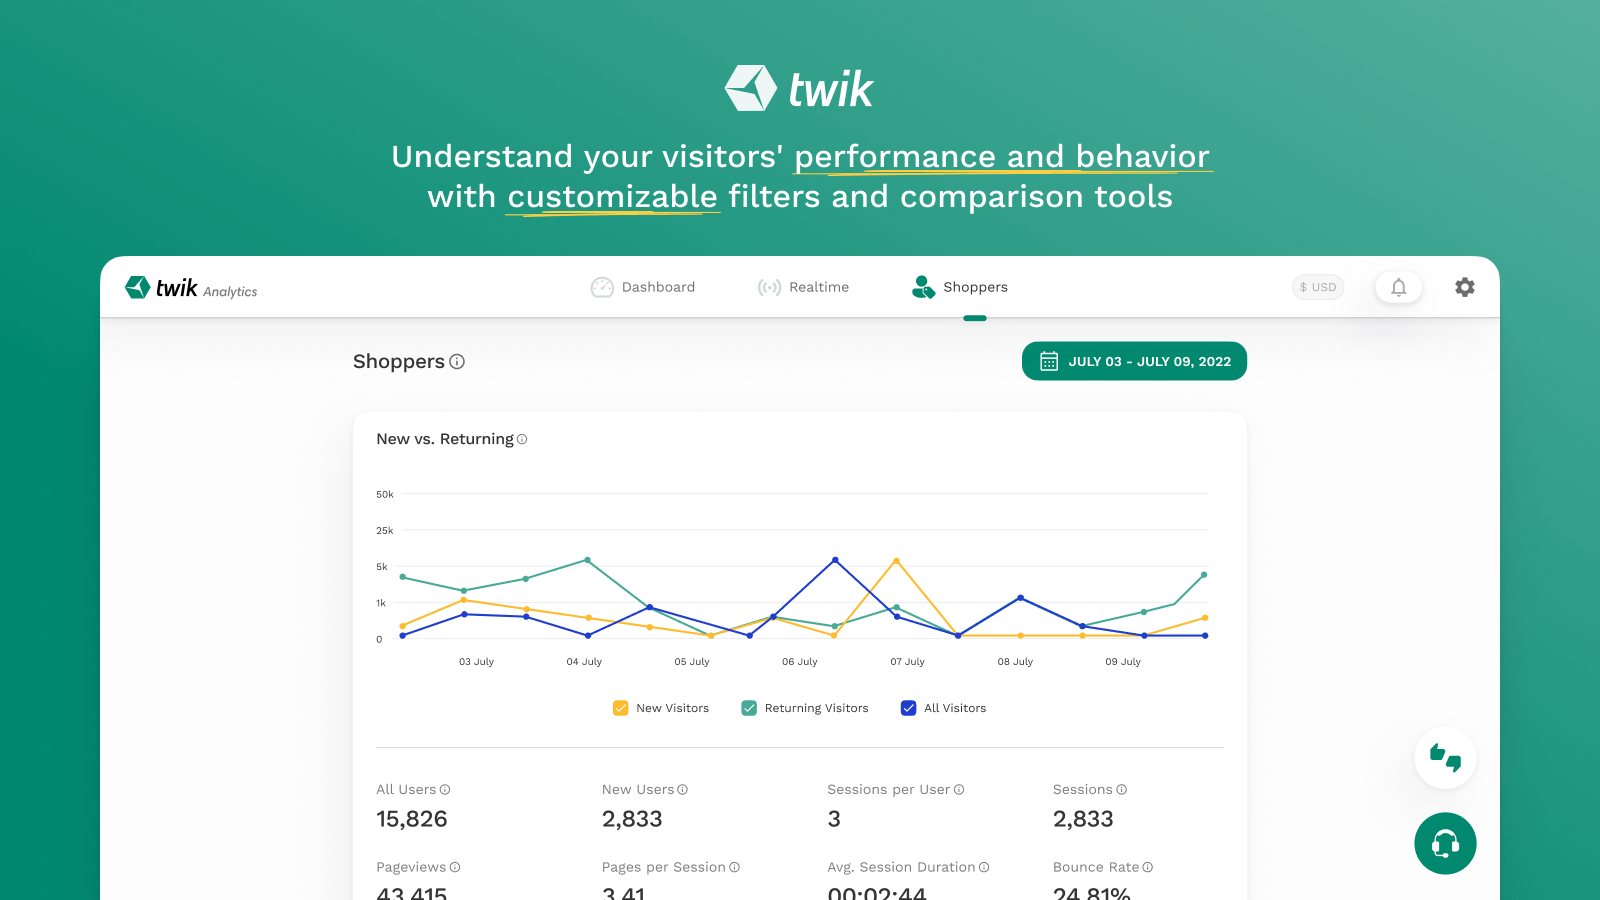 Discover visitors' performance with customizable filters